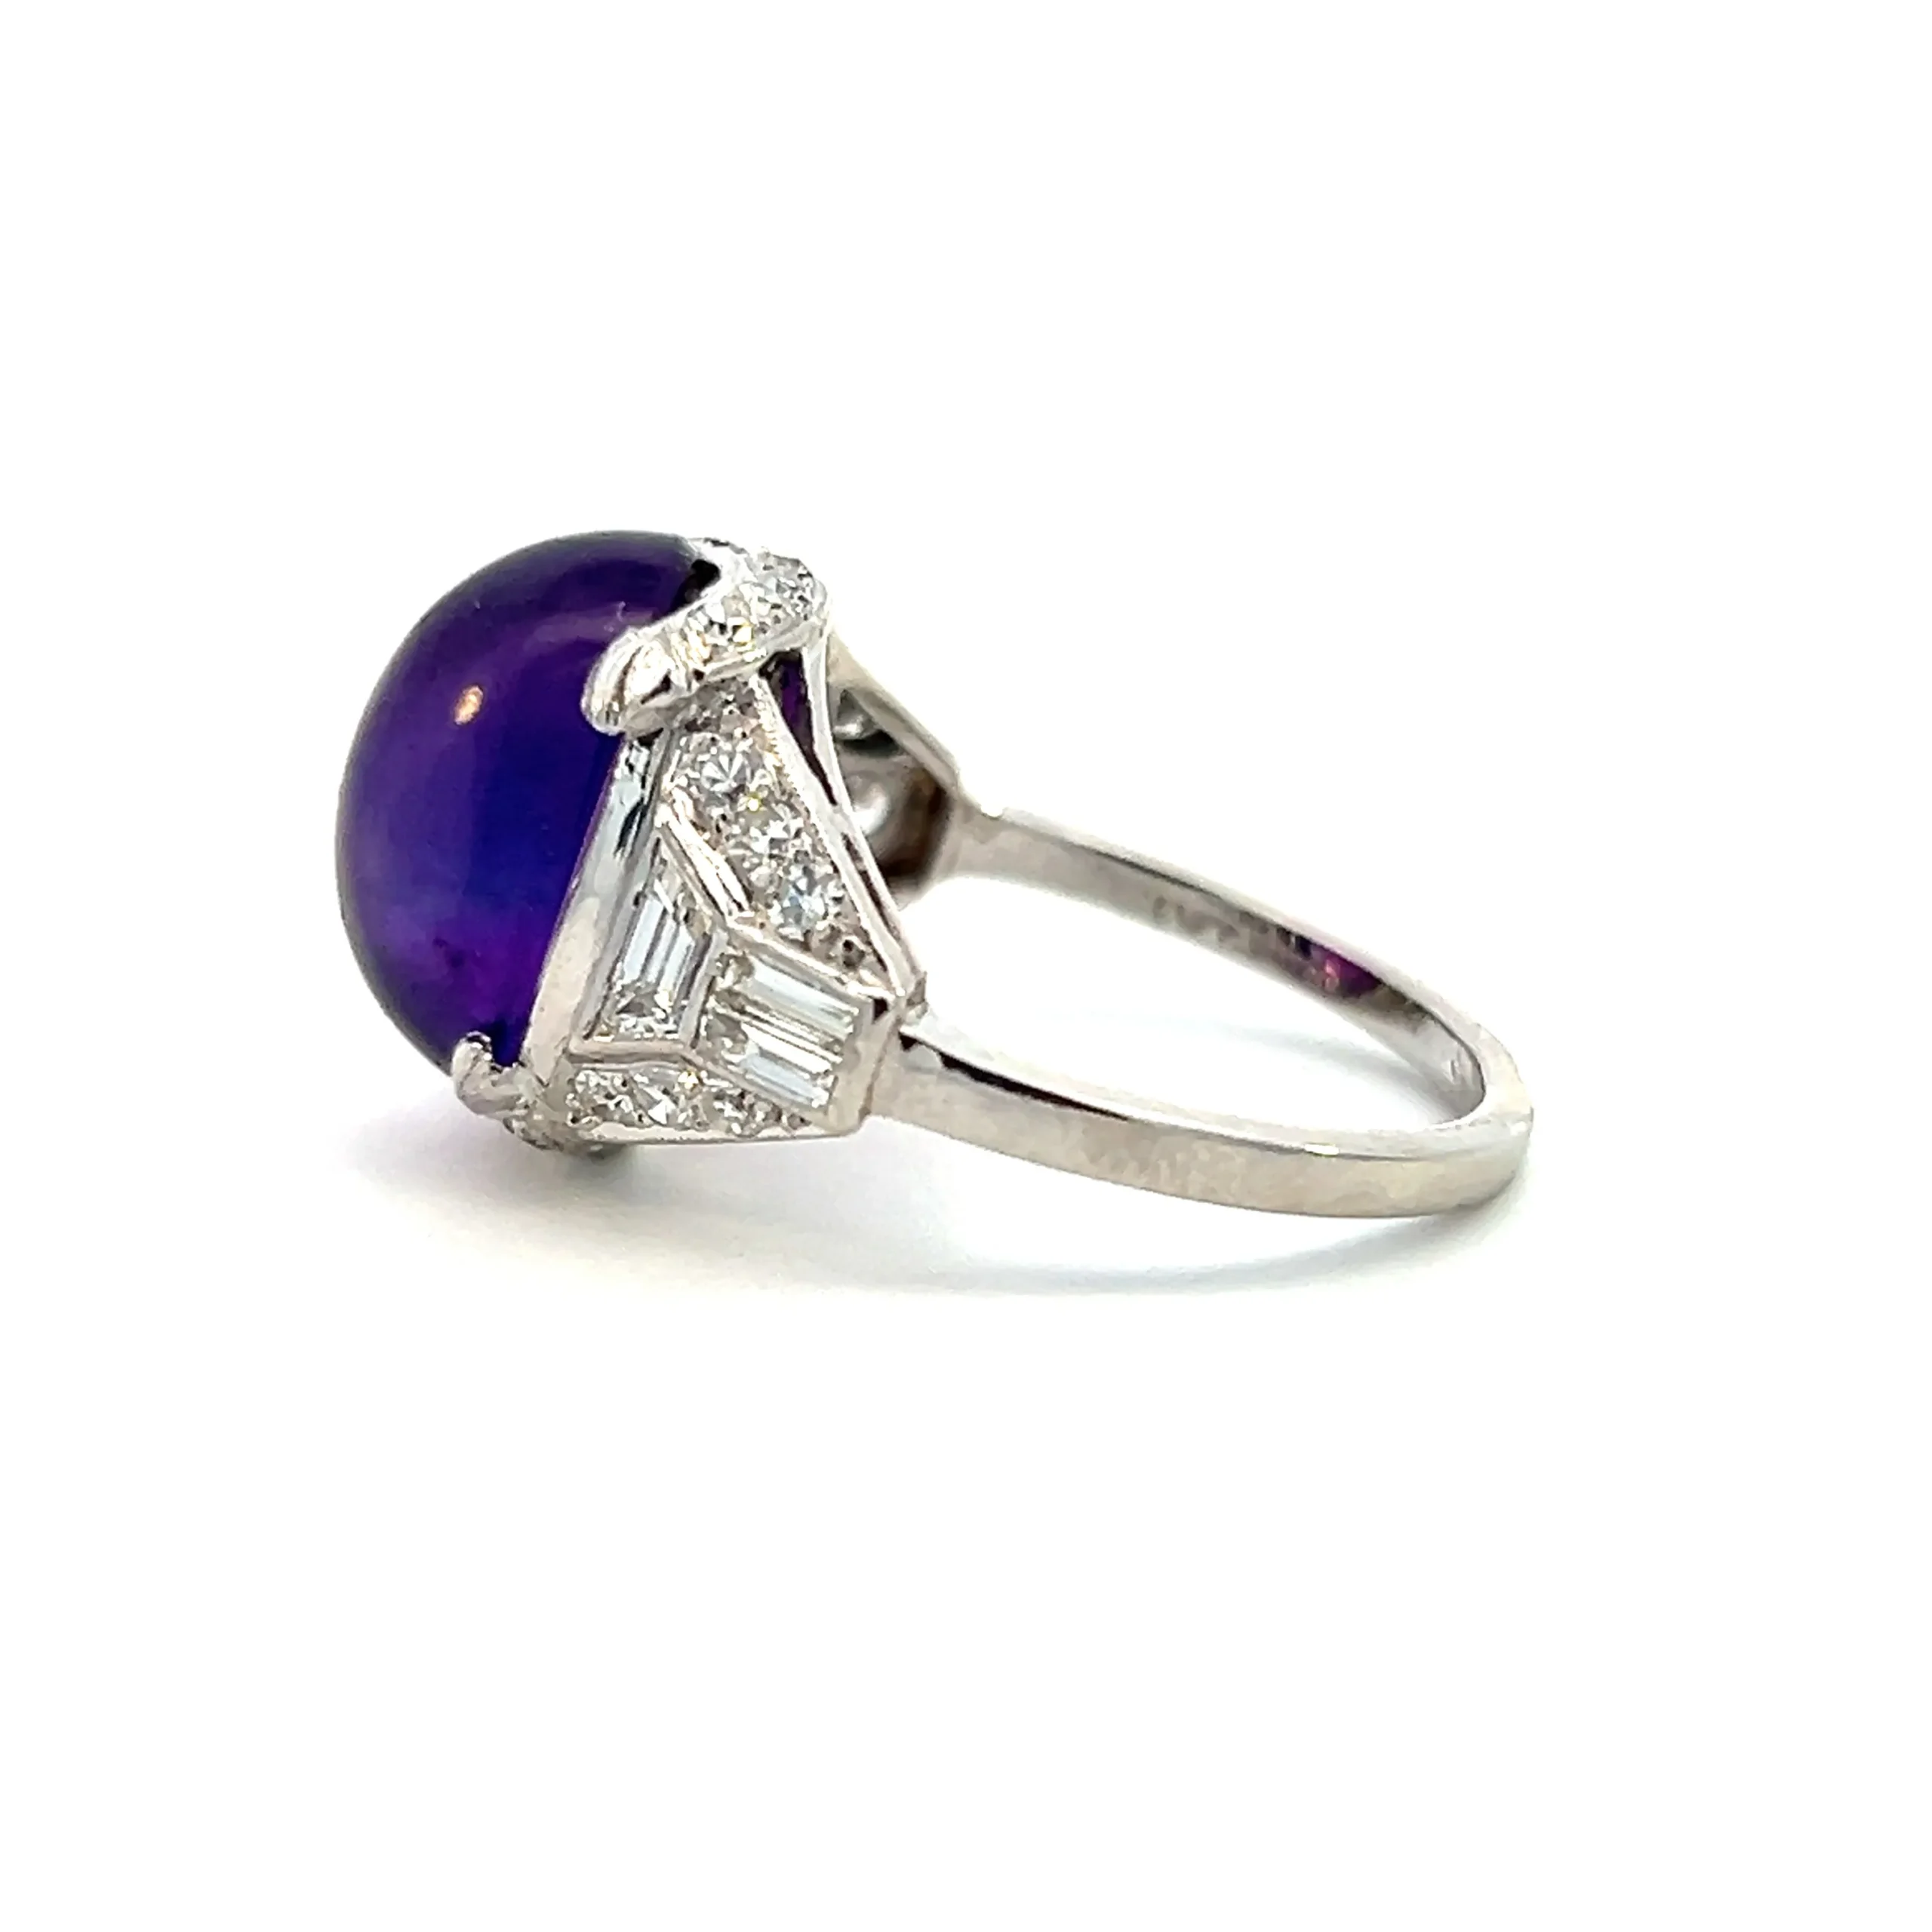 One estate vintage platinum amethyst ring from the 1920s featuring an oval cabochon dark amethyst measuring 12x10.40mm. The shoulders of the ring are accented with trapezoid diamonds, baguette diamonds, and round diamonds.